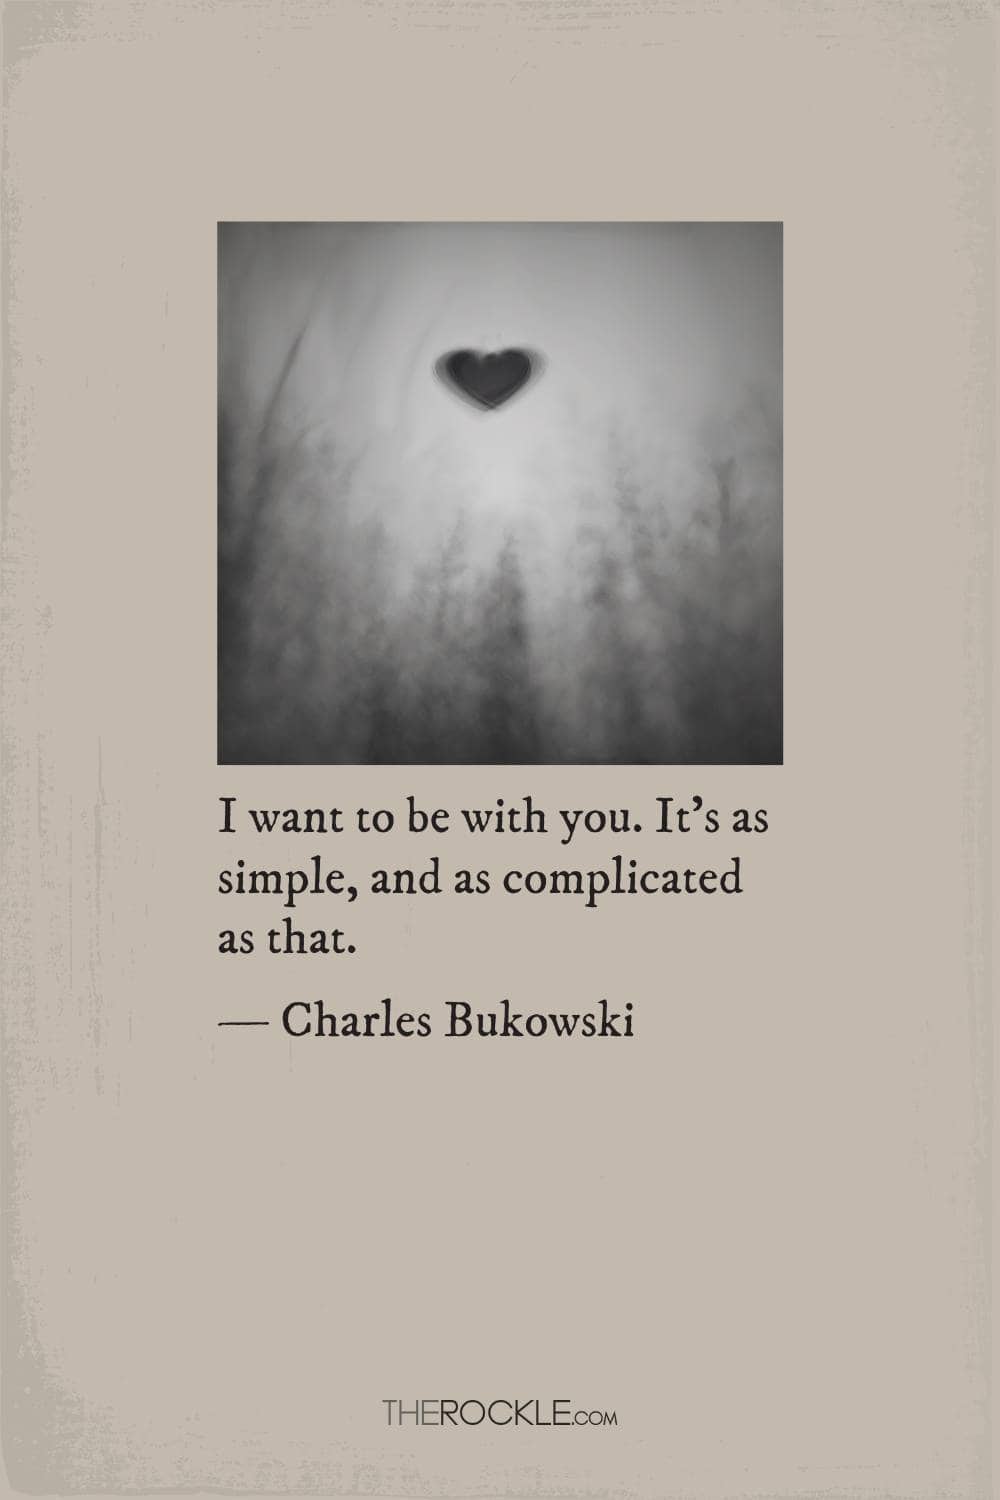 Bukowski quote about love and desire